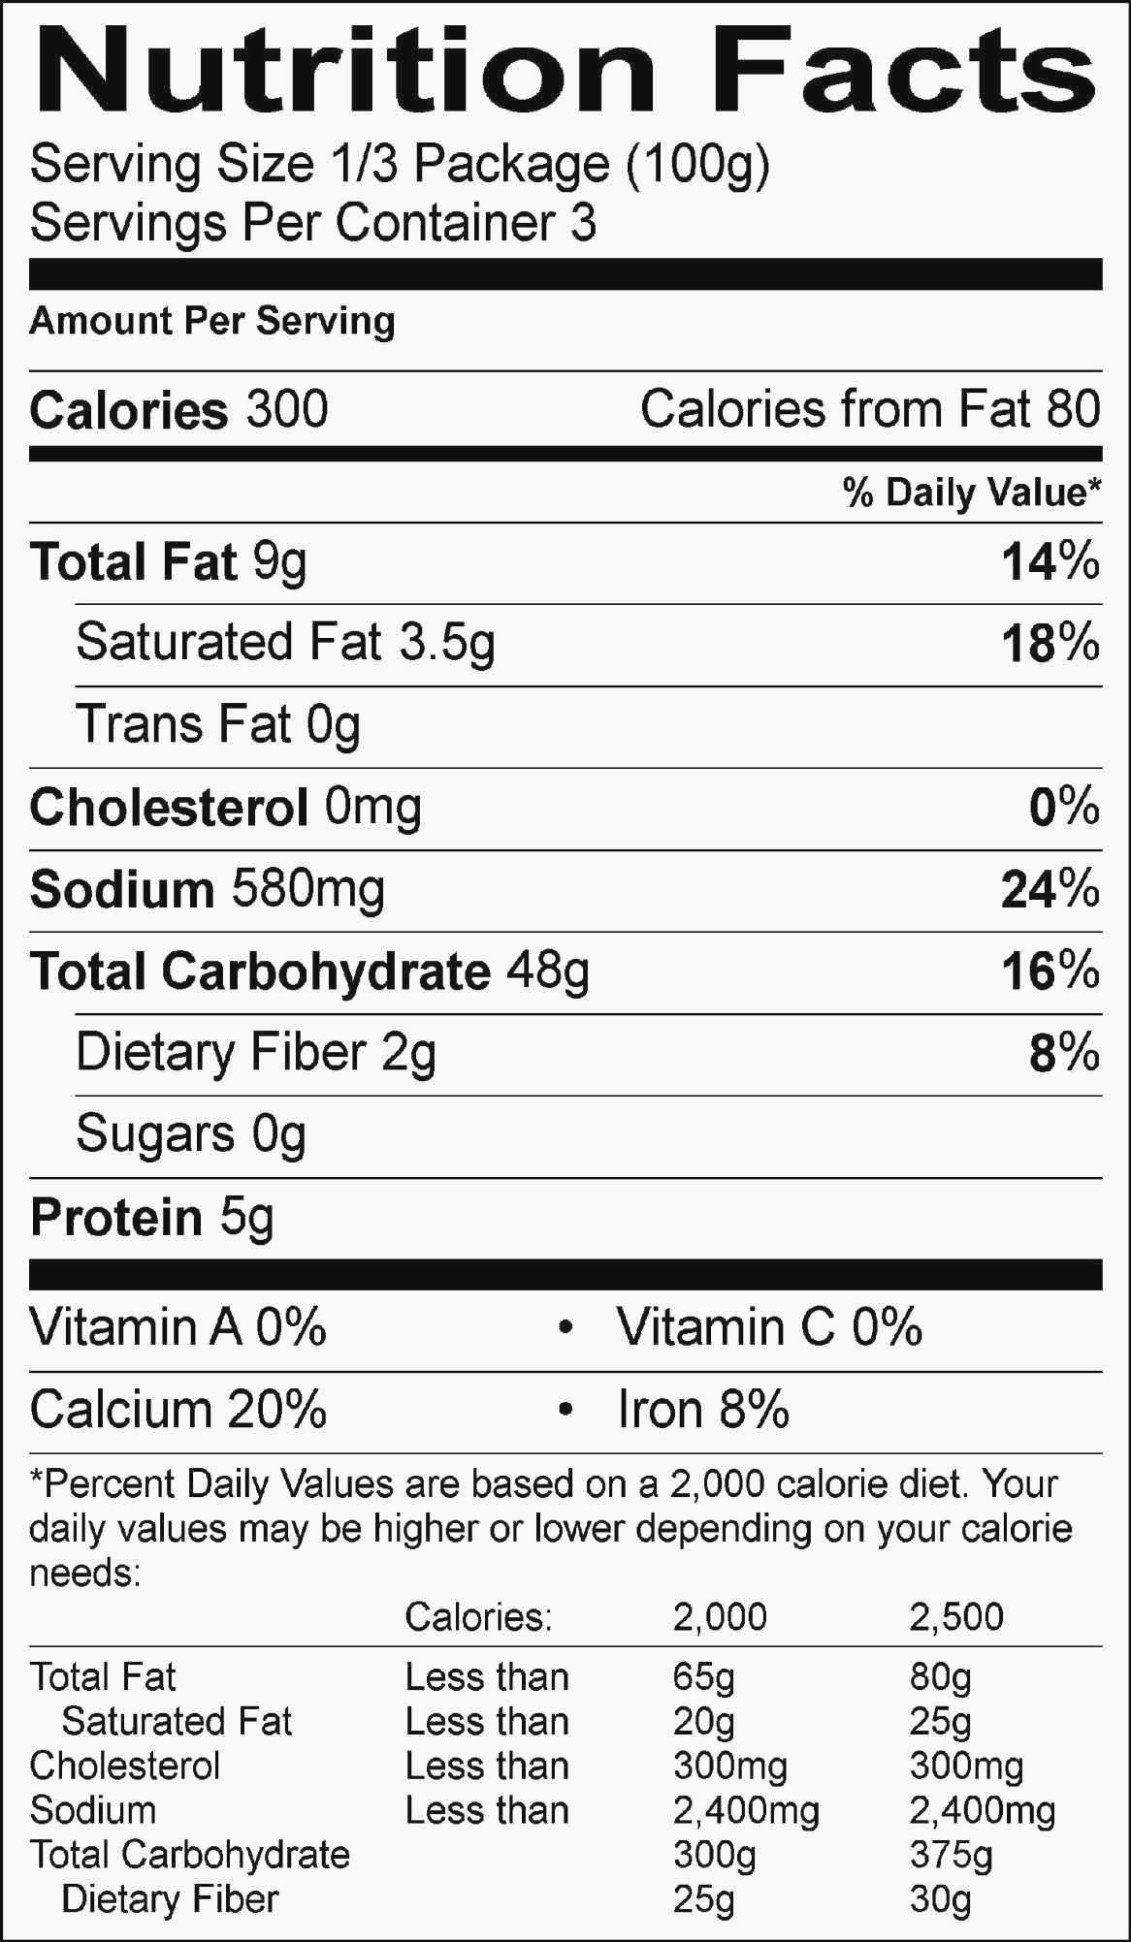 Nutrition Facts Template Word Best Of Nutritional Label Template Excel Nutrition Ftempo